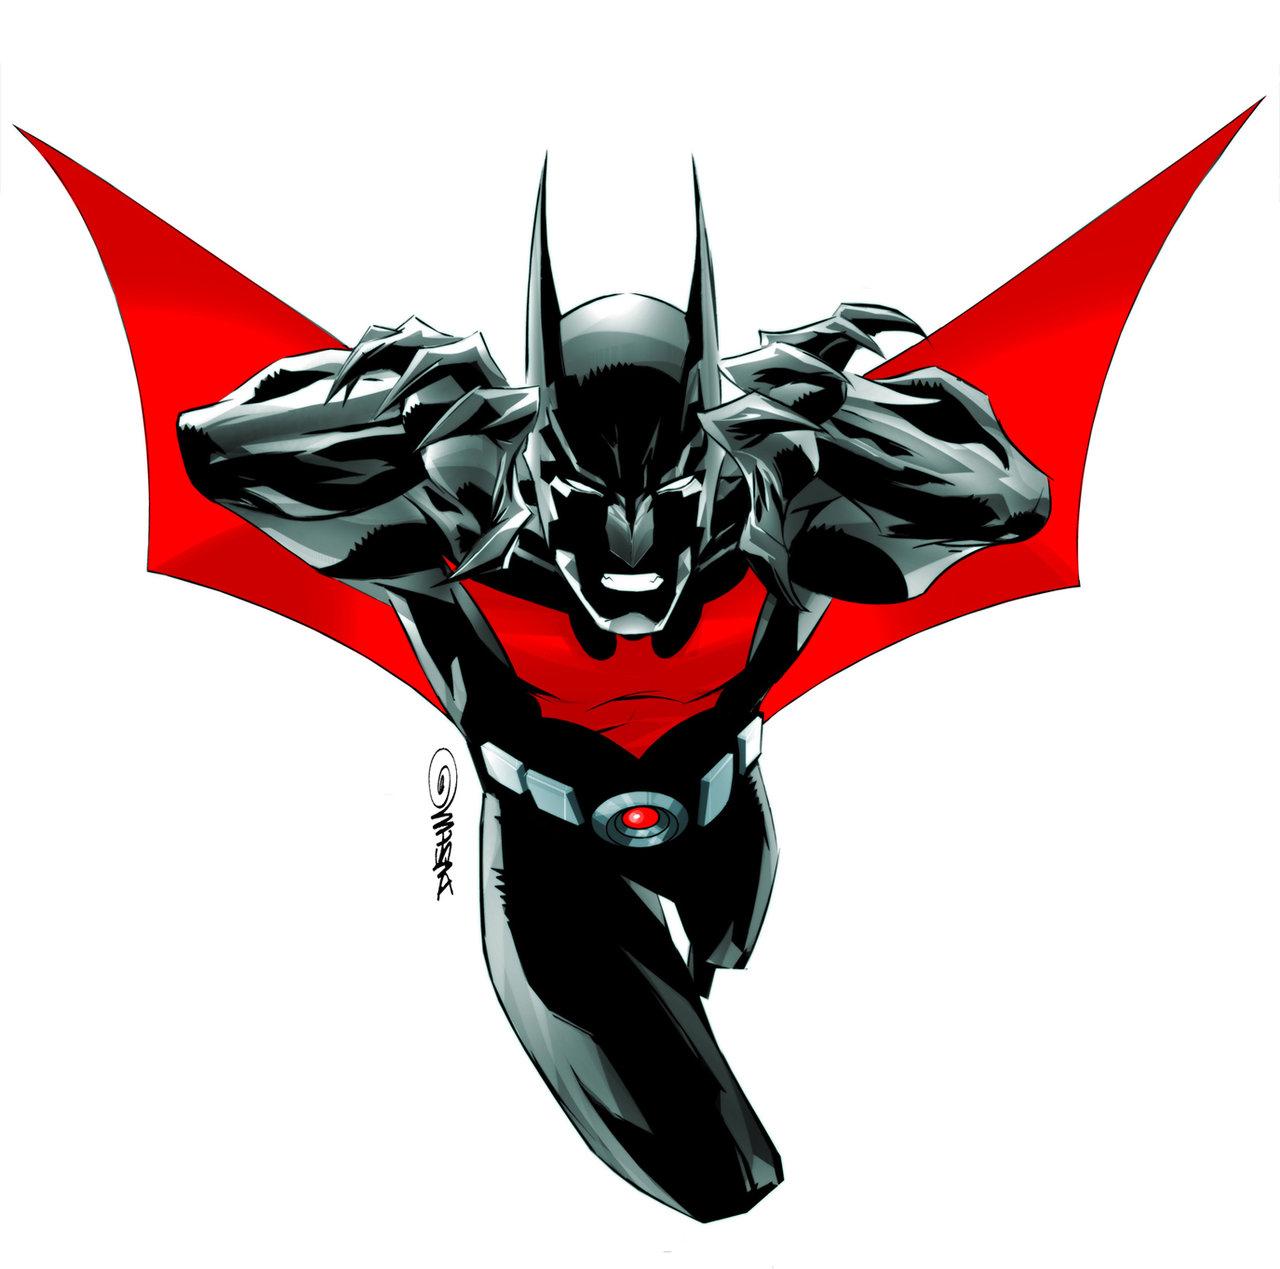 i love batman beyond.but not Terry Mcginnis. Discussion